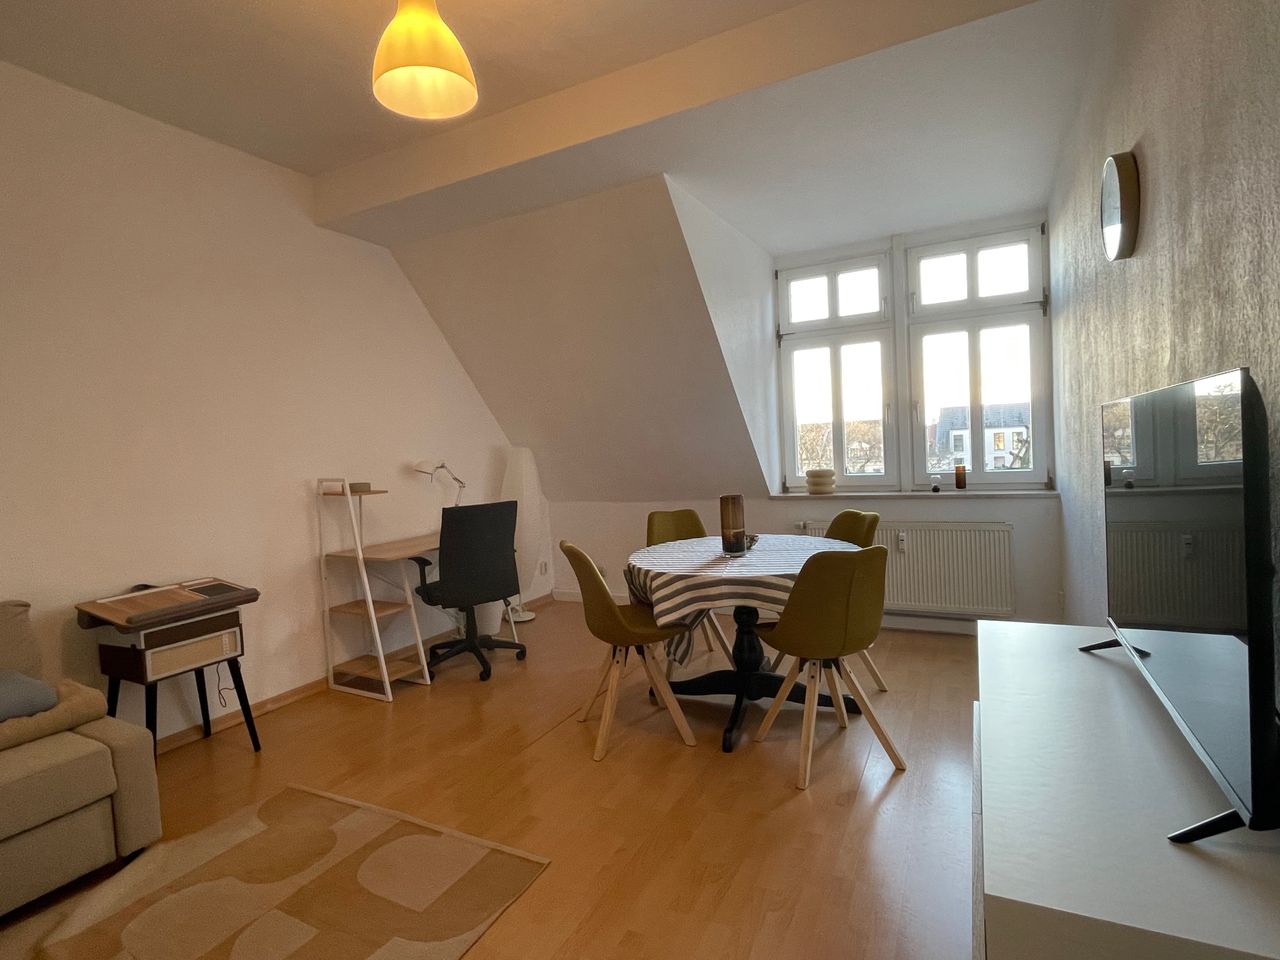 Stunning apartment with direct view to Sankt Peters church in the centre of Leipzig